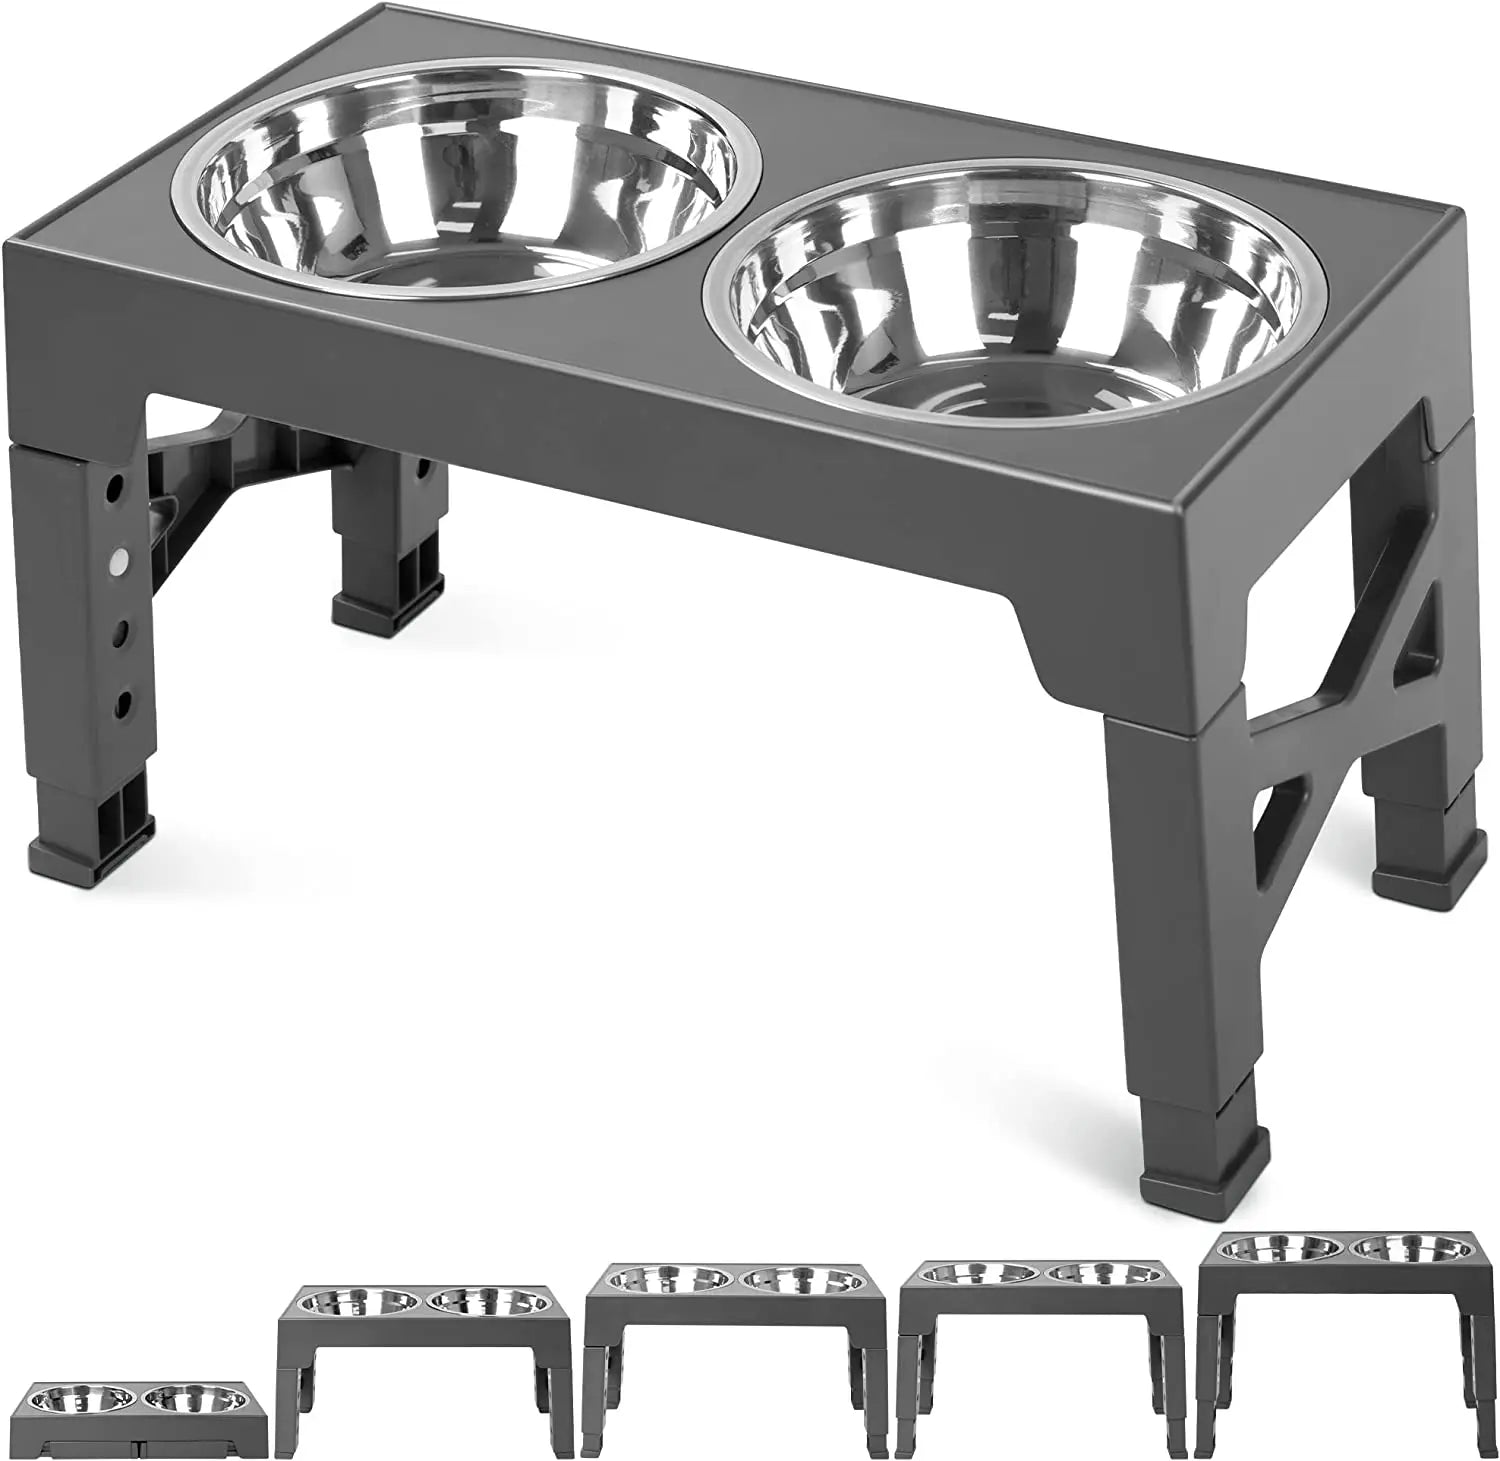 Cloud Discoveries Paws Perfection Pet Dining Set - Adjustable Height Double Bowls with Stainless Stand for Big Dogs